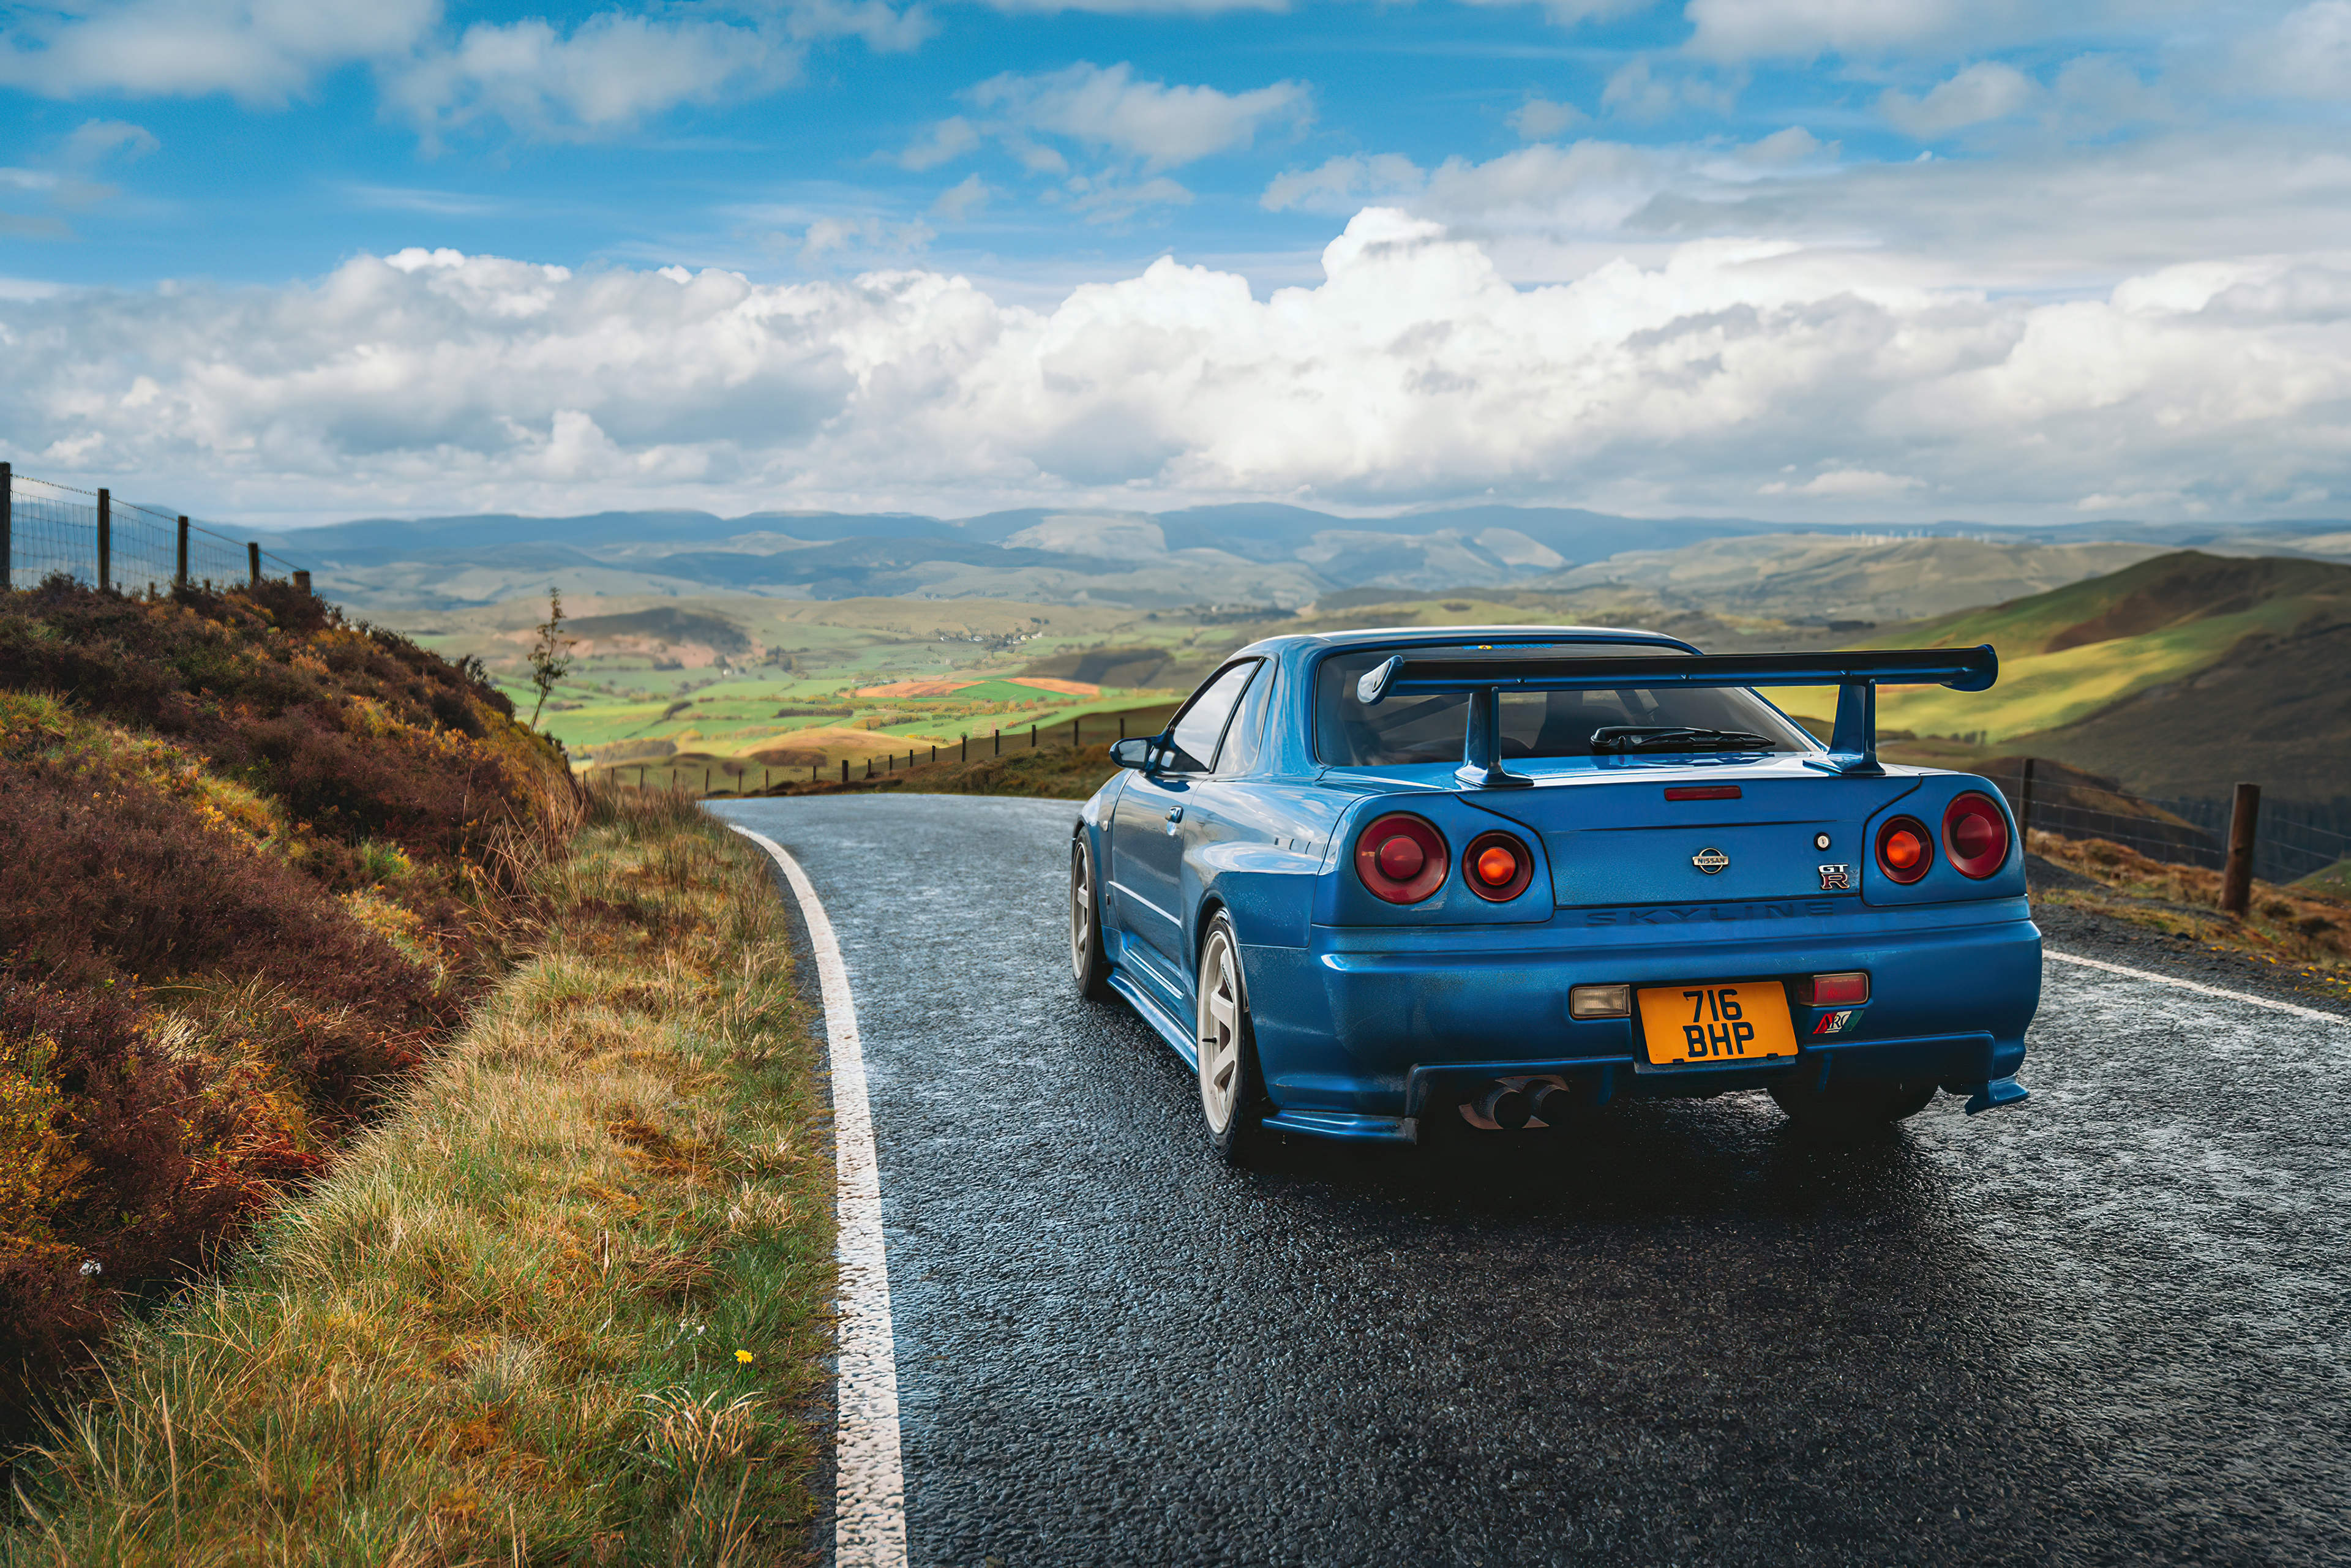 Nissan Skyline Gtr R34, HD Cars, 4k Wallpapers, Images, Backgrounds